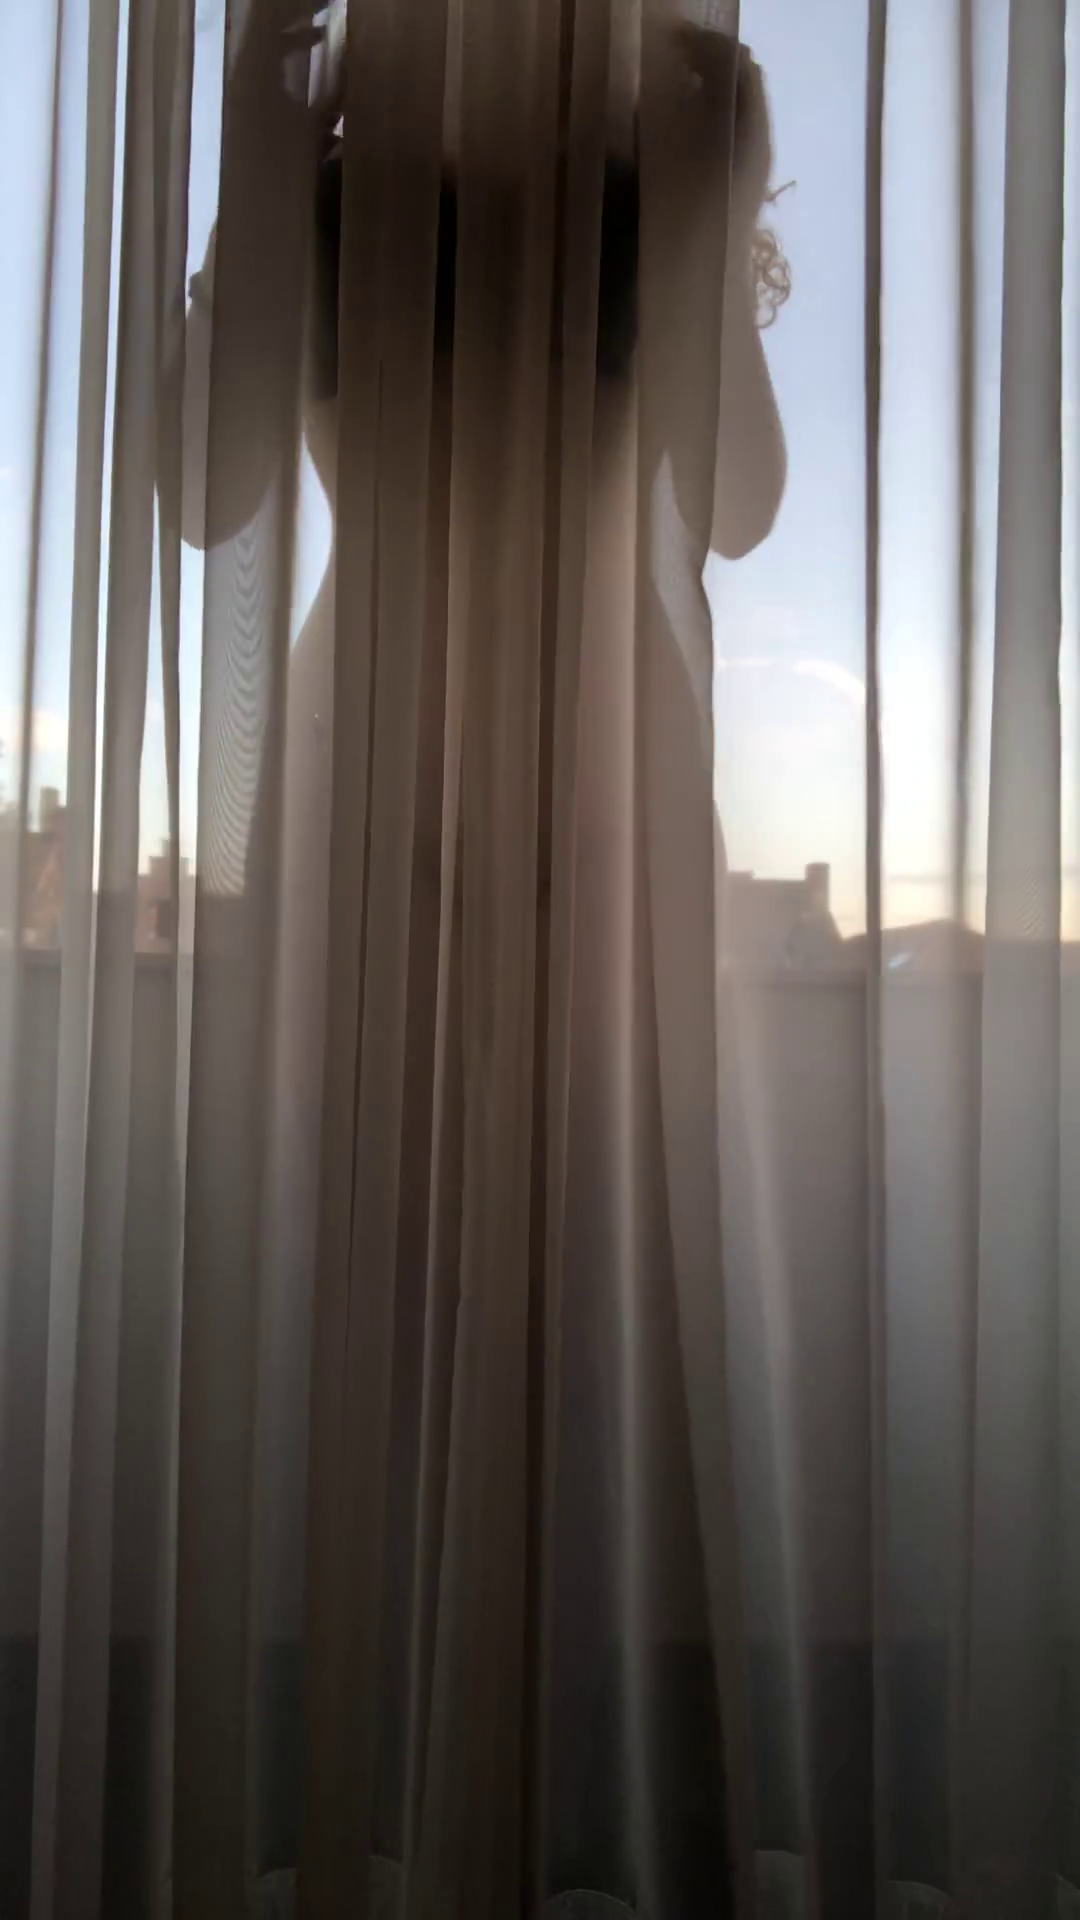 Video by Succubus Queen with the username @Lucasdu,  October 30, 2019 at 3:55 AM. The post is about the topic MILF and the text says 'Curtain
https://gfycat.com/acidicfondgreatargus'